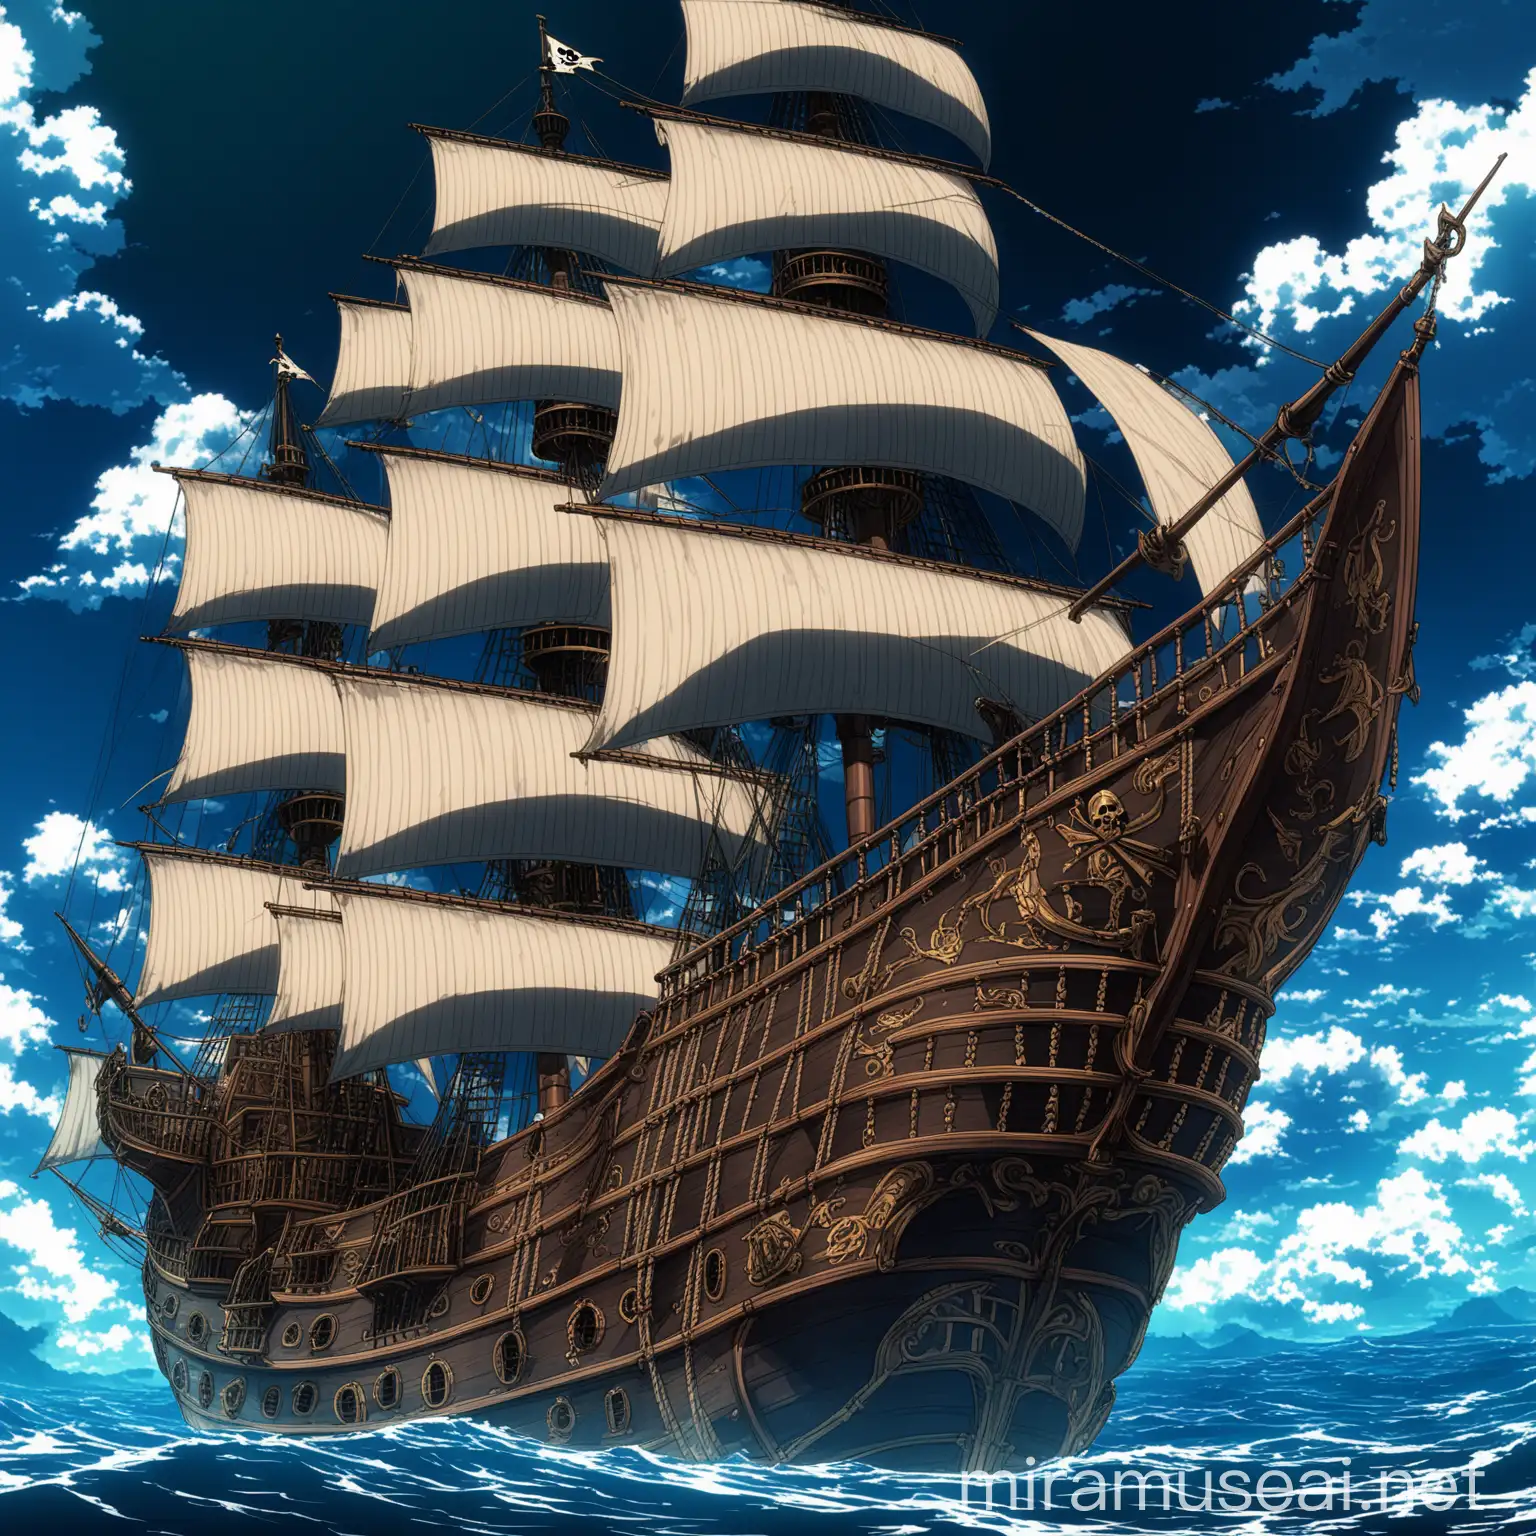 a giant elegant antique victorian pirate ship, the sails are majestic, in ocean. in anime